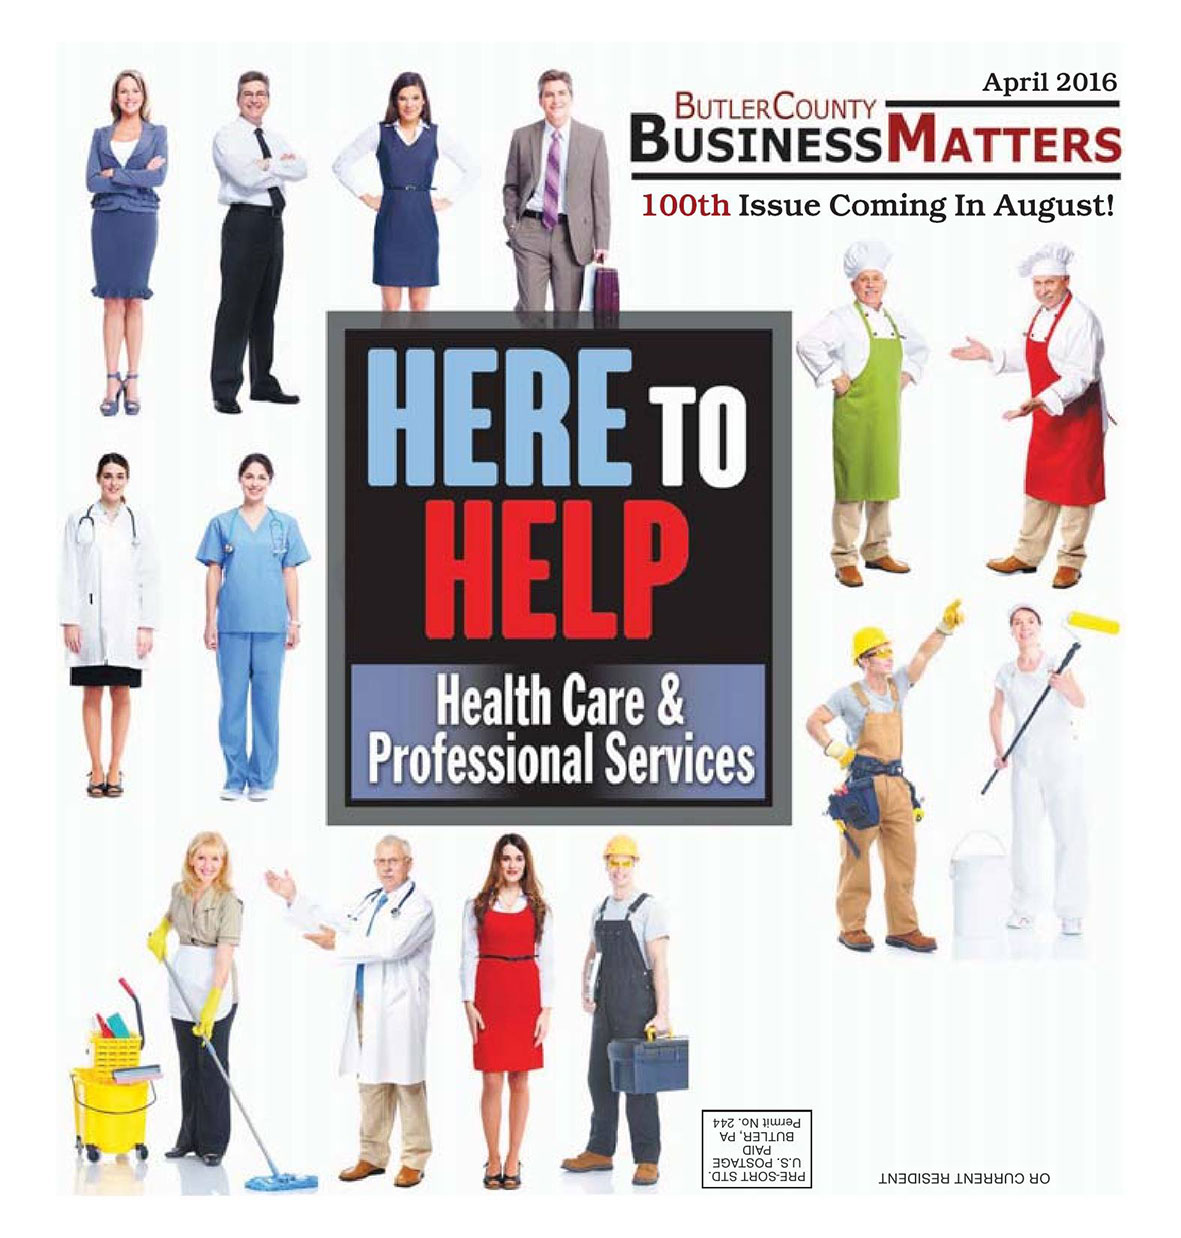 April 2016 - Here to Help - Health Care & Professional Services